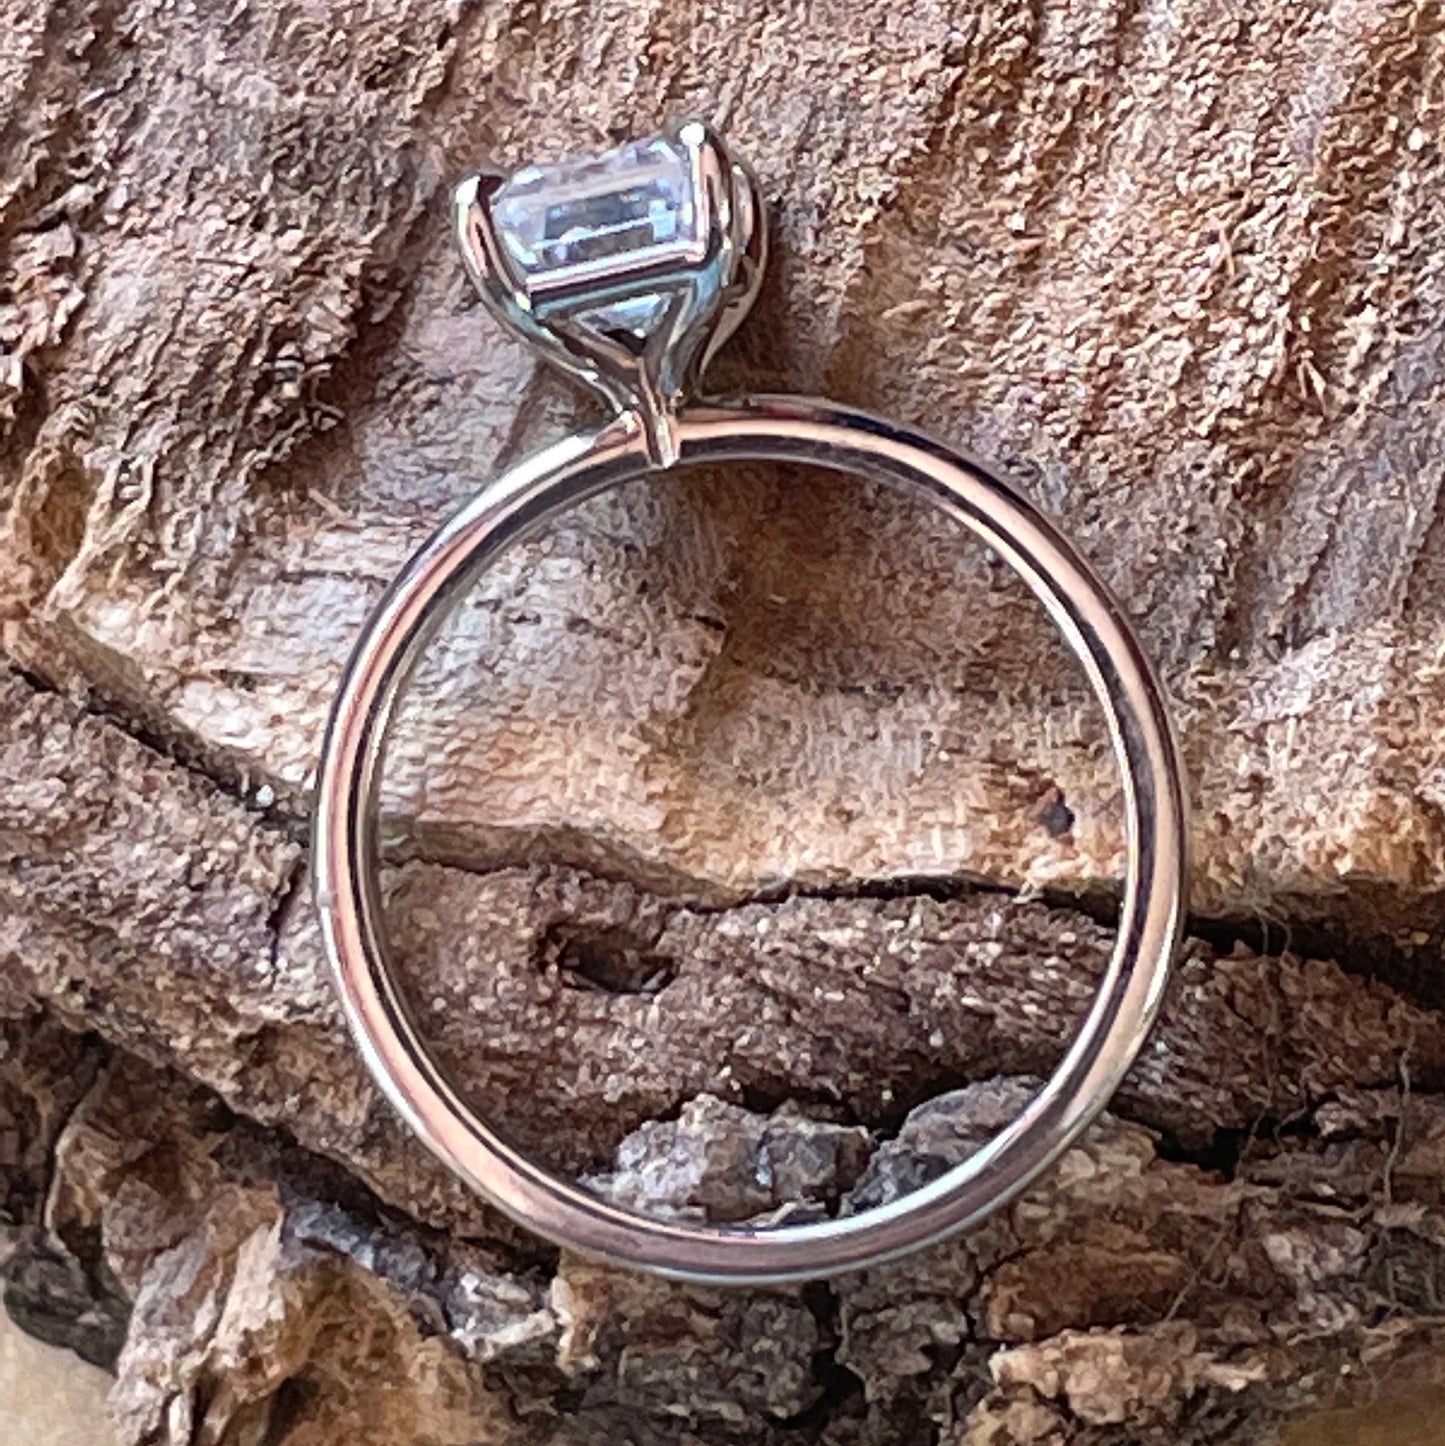 ready to ship - naked shay ring - 2 carat emerald cut round NEO moissanite engagement ring - J Hollywood Designs